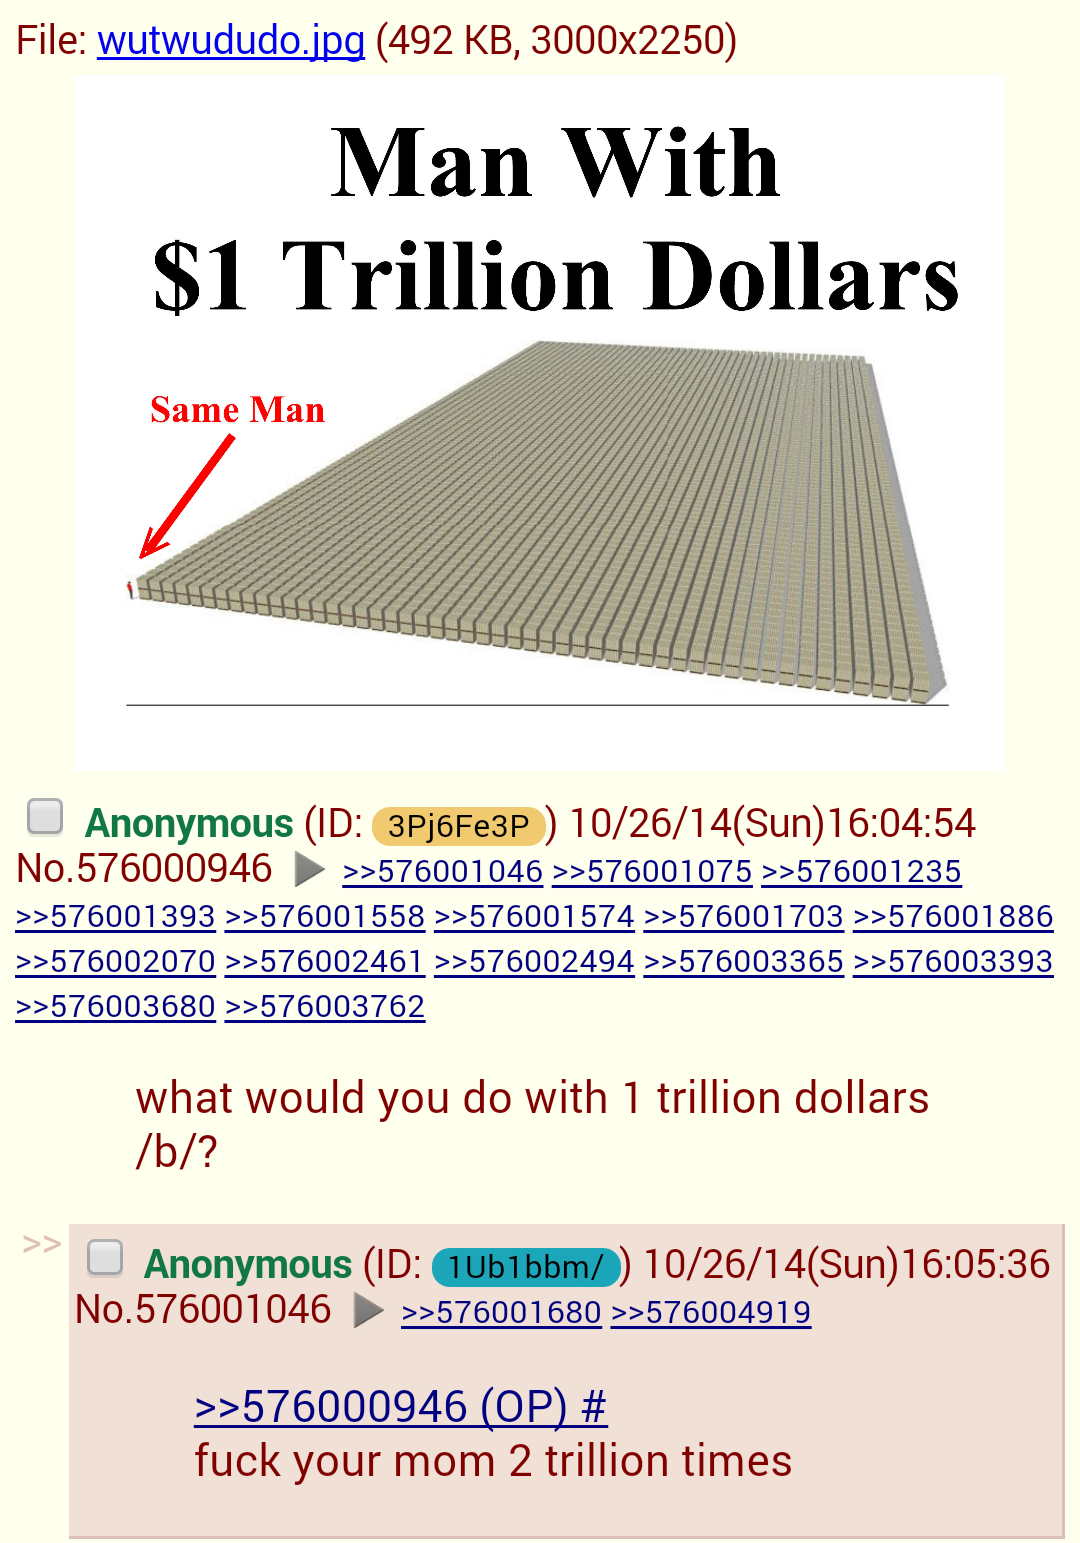 Things to do with 1 Trillion $,part 1